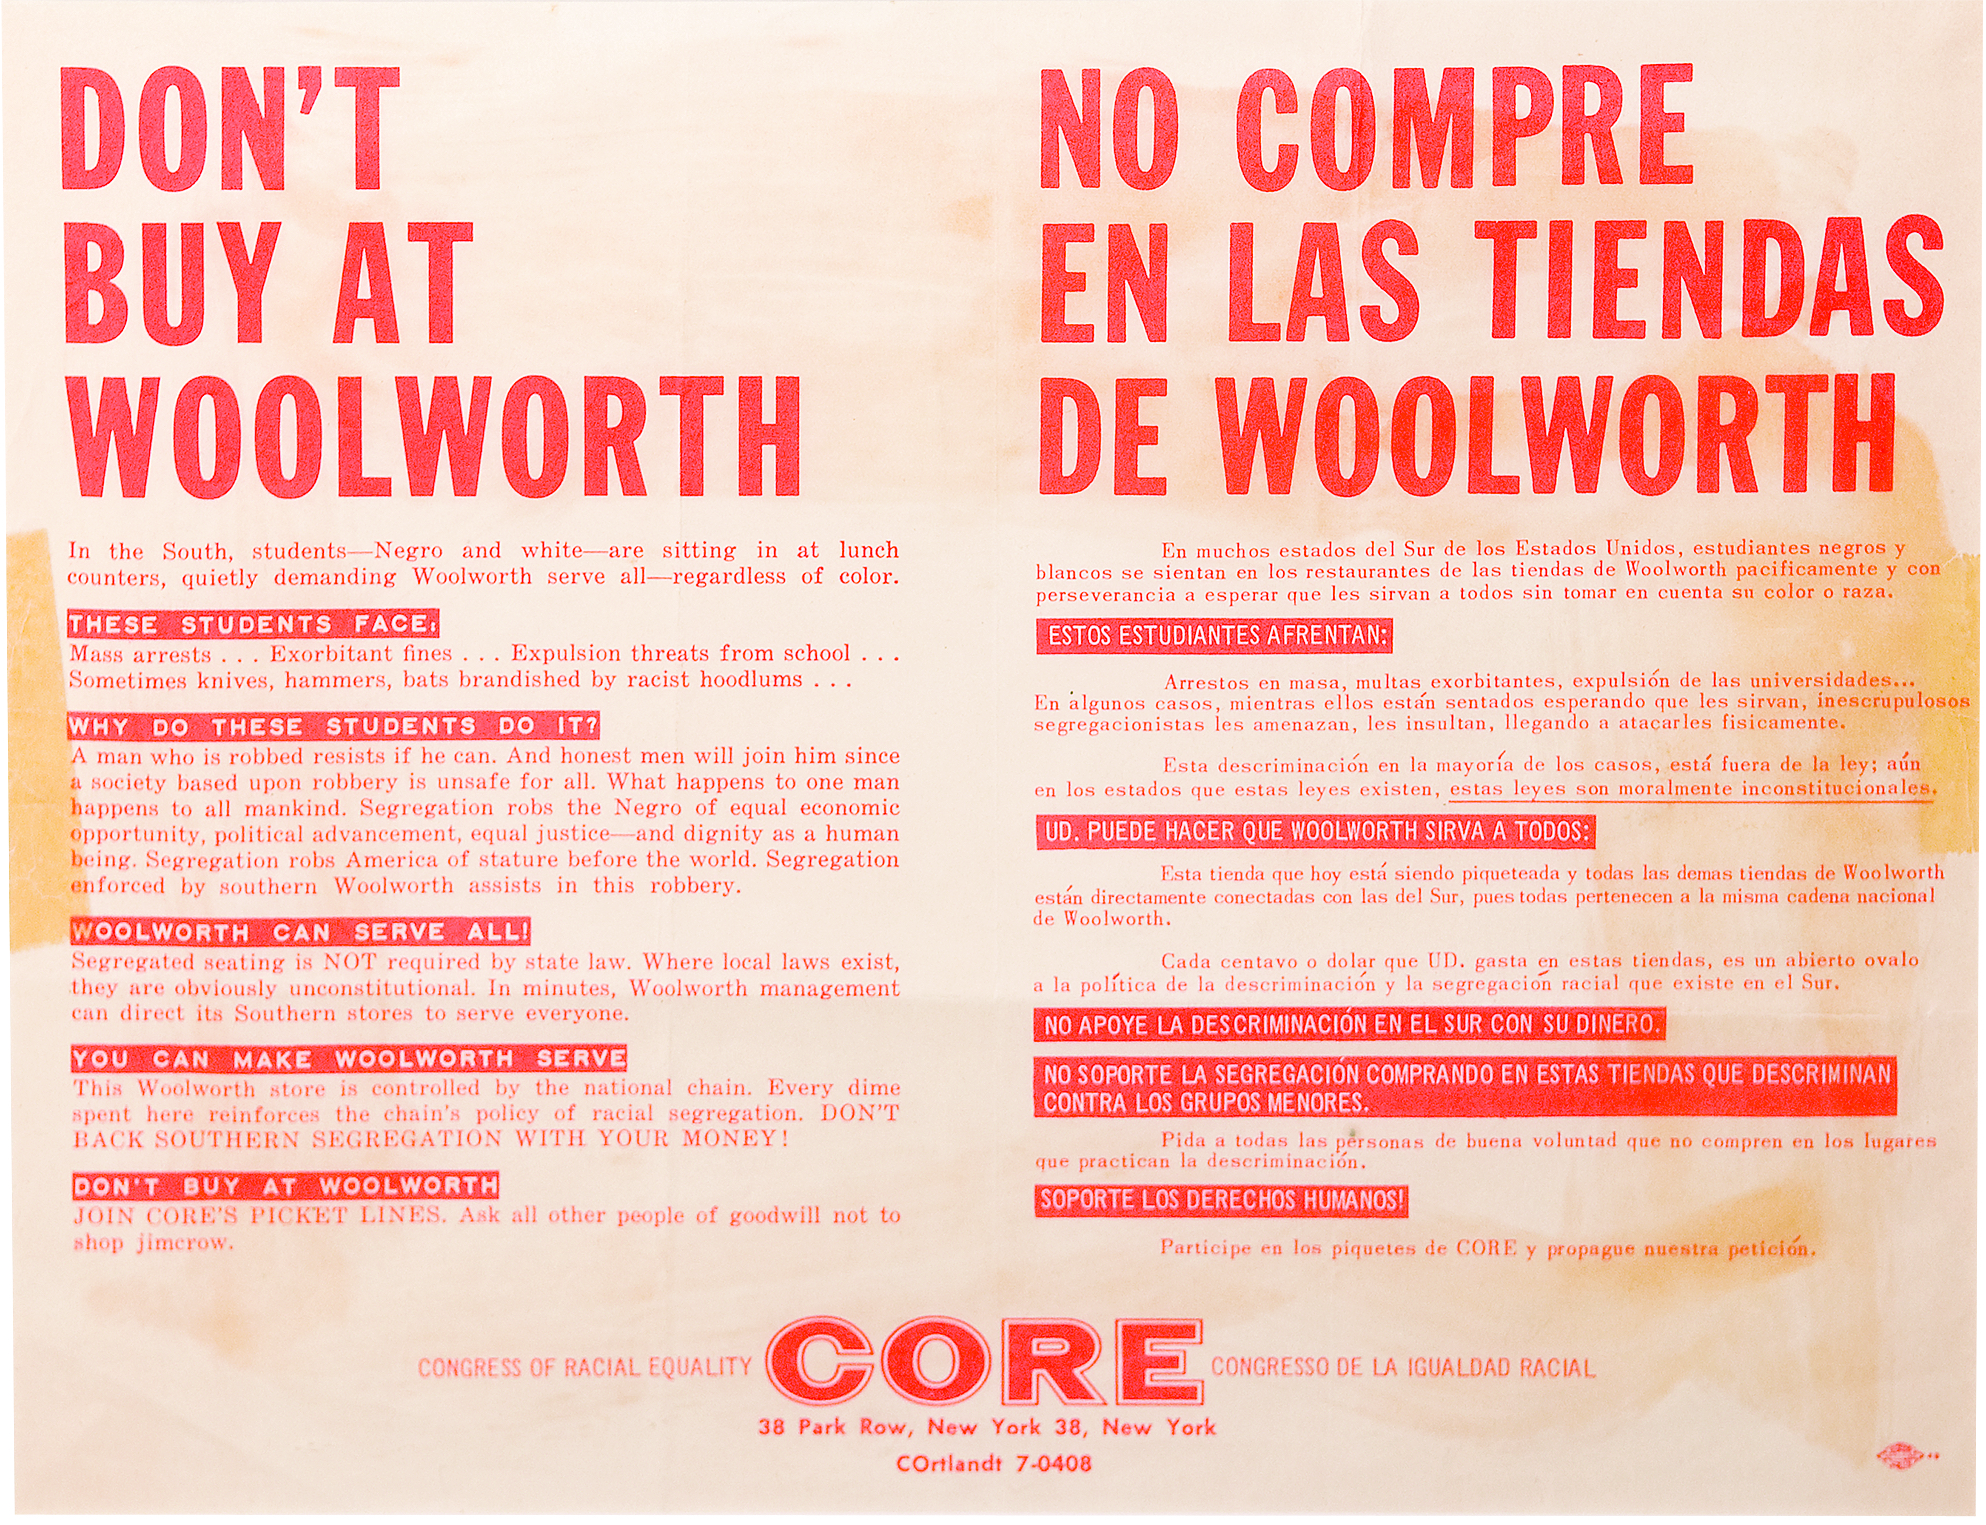 A bilingual poster advertising the Woolworth Boycott